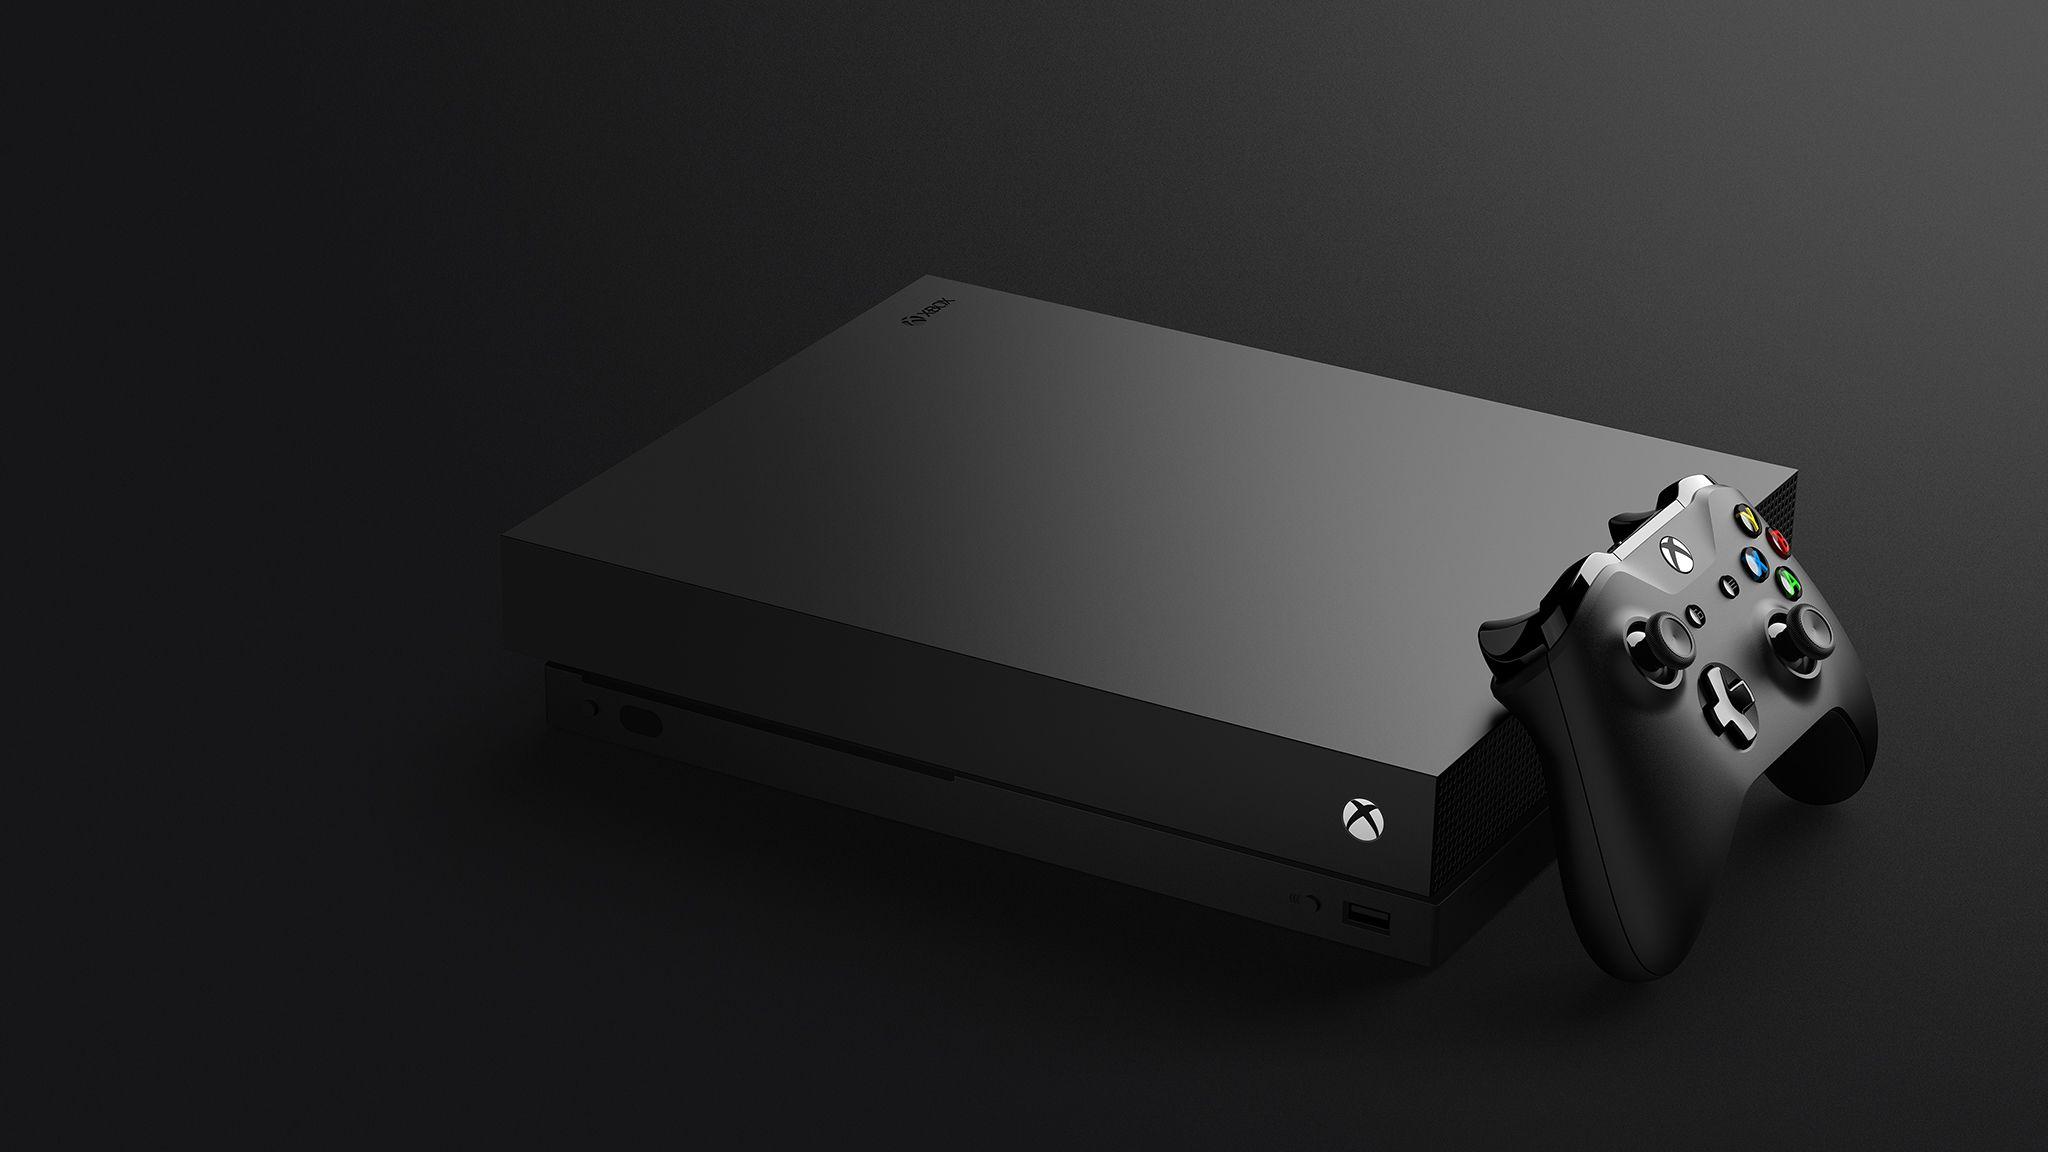 Introducing the World's Most Powerful Console: Xbox One X